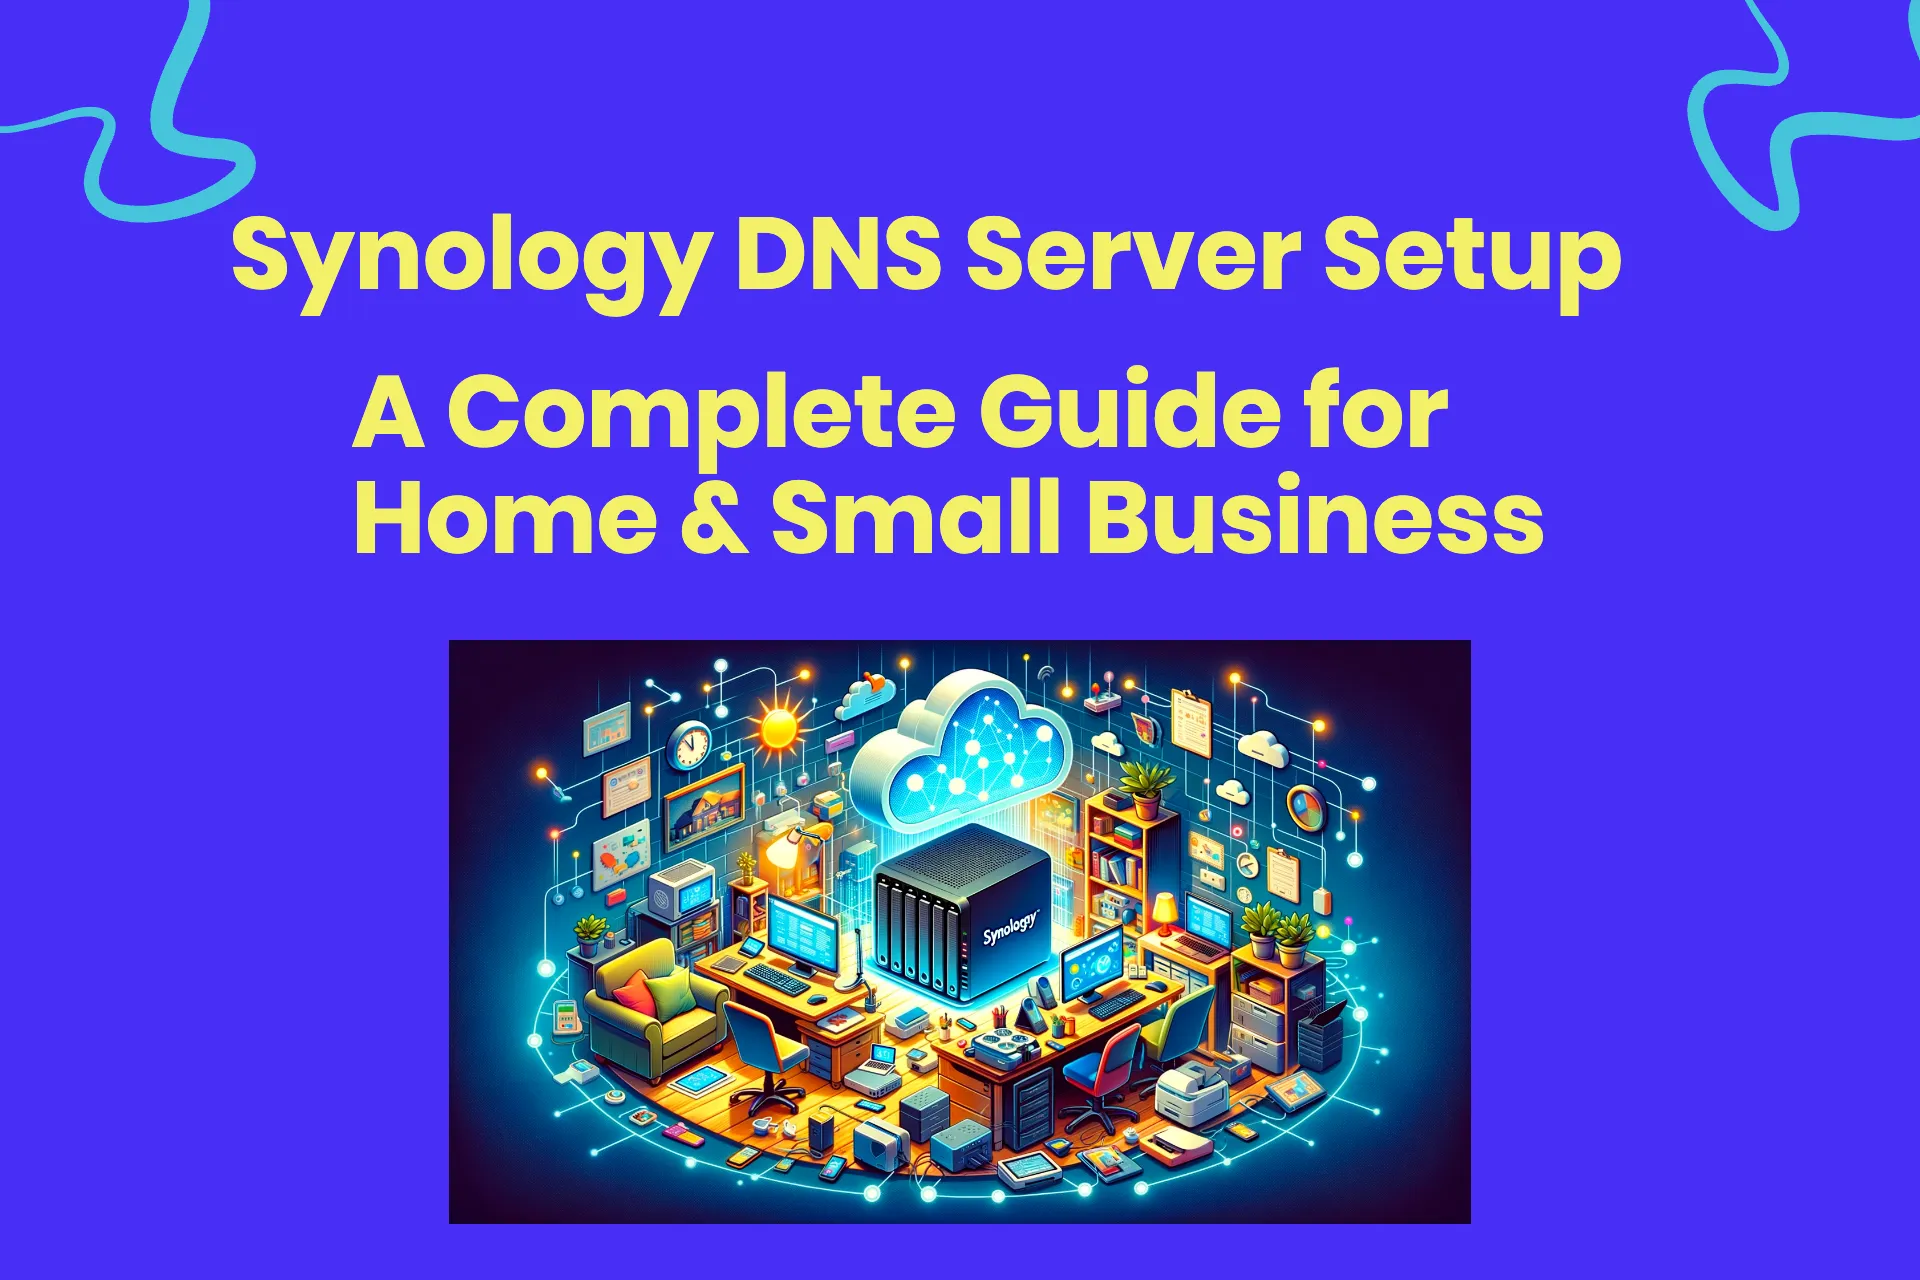 Synology DNS server feature